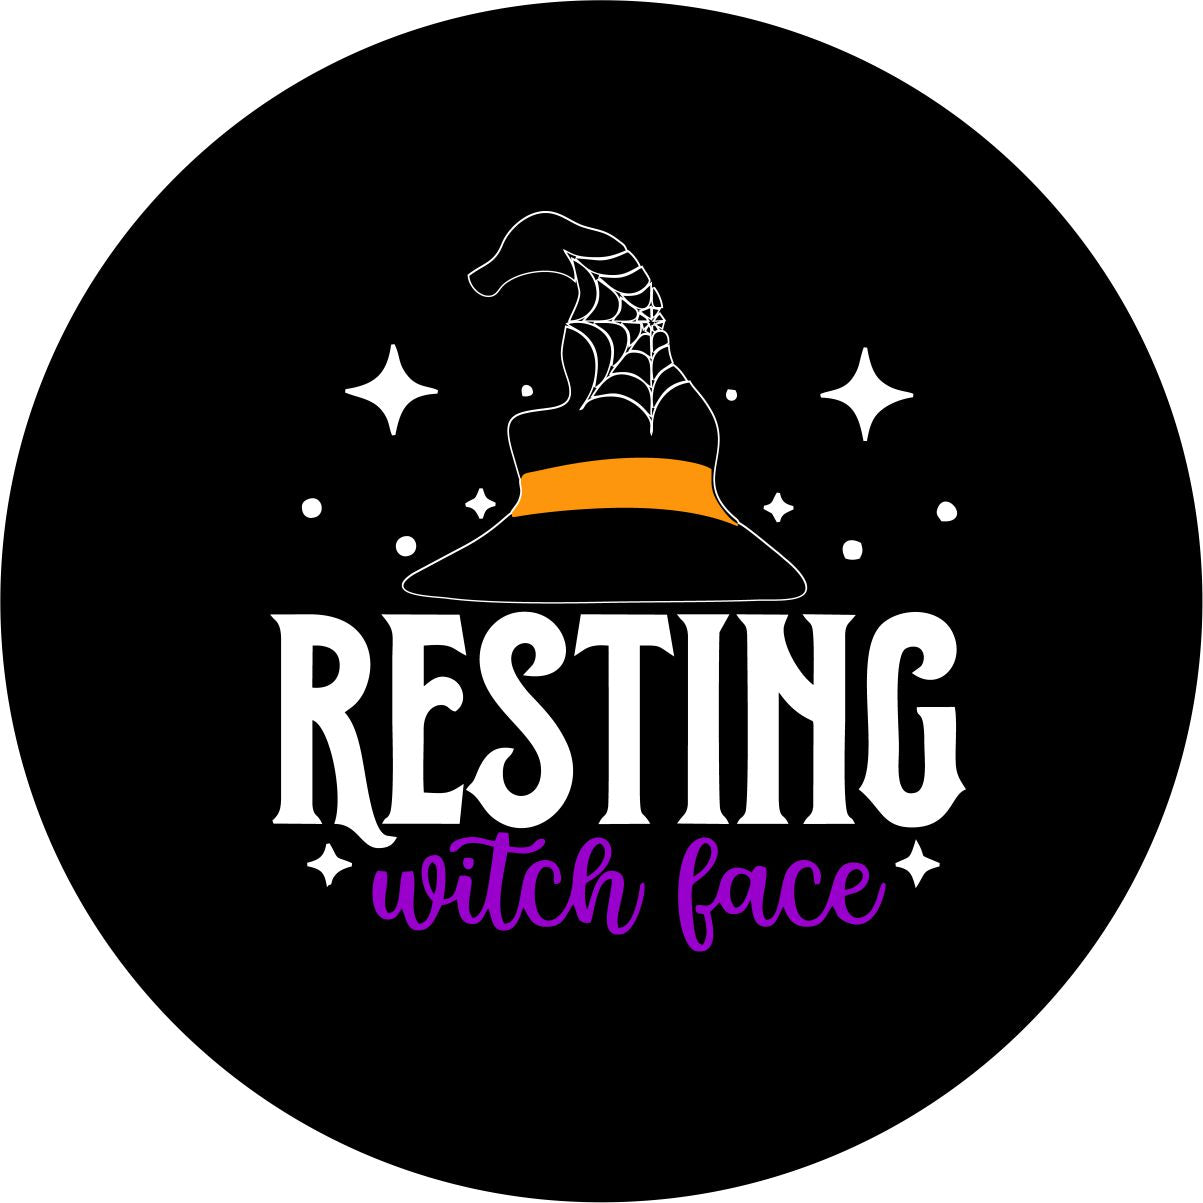 Resting witch face and a spooky witch hat spare tire cover design for the fall halloween season.